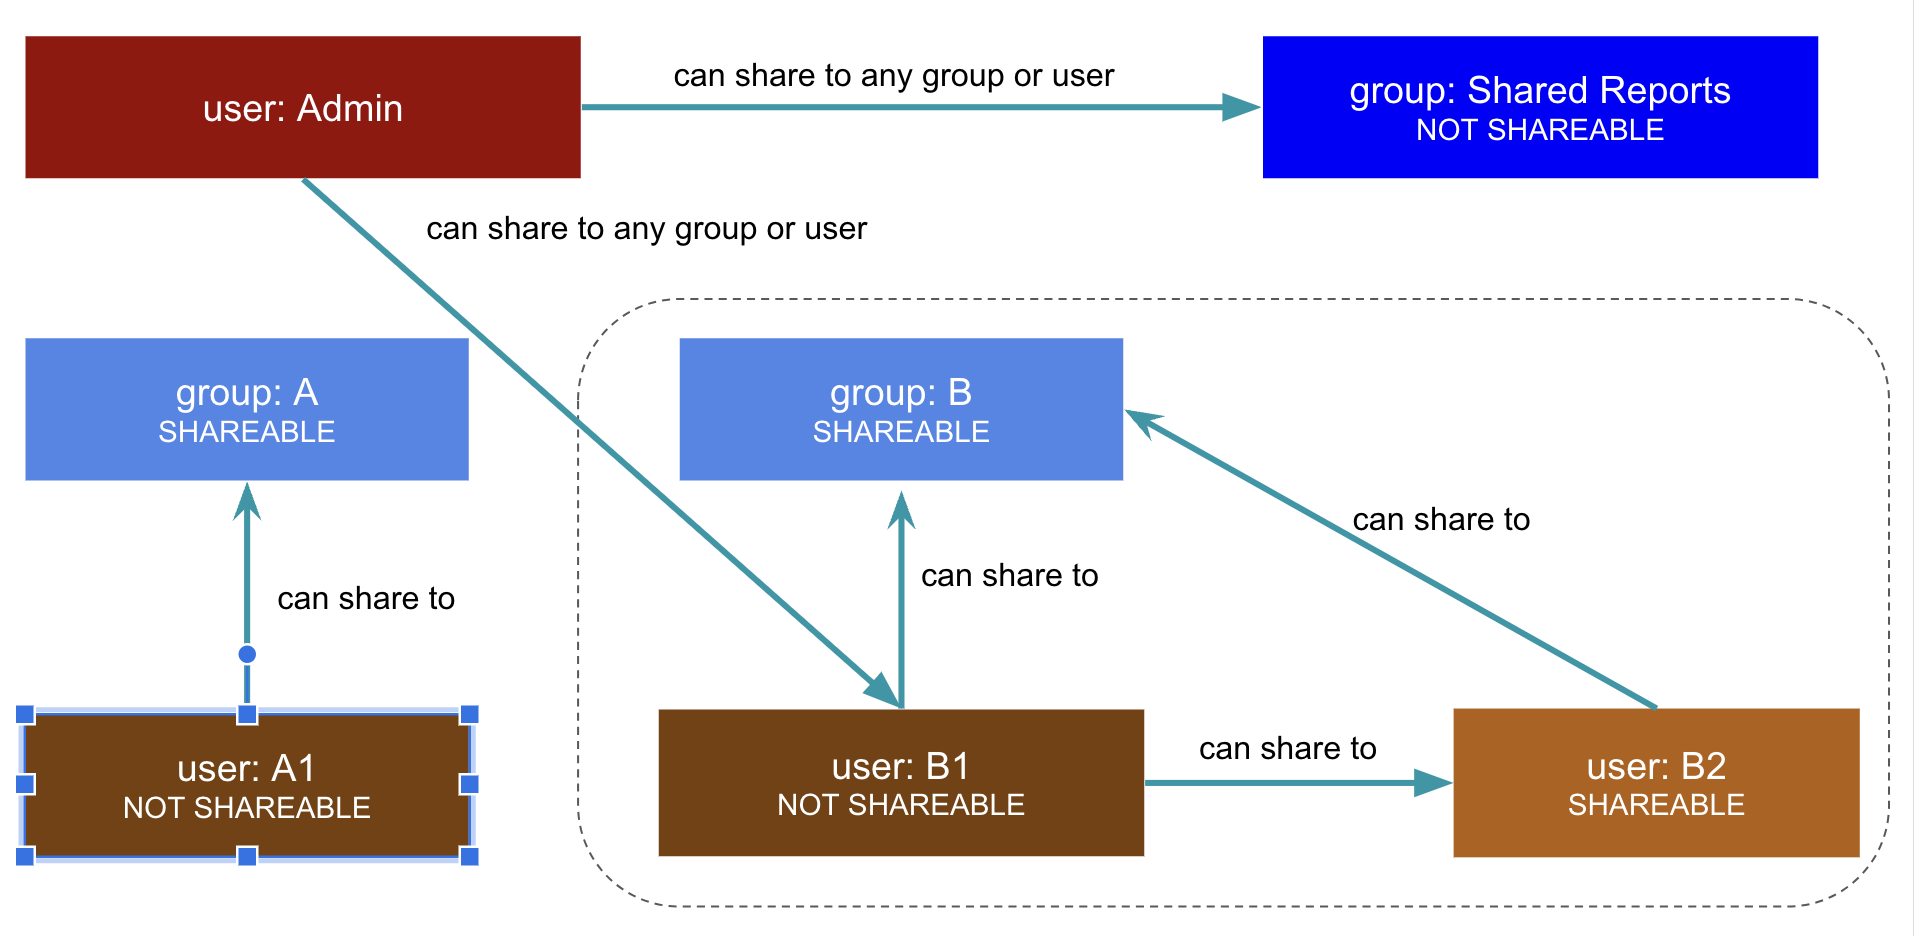 Shareability and group membership controls visibility